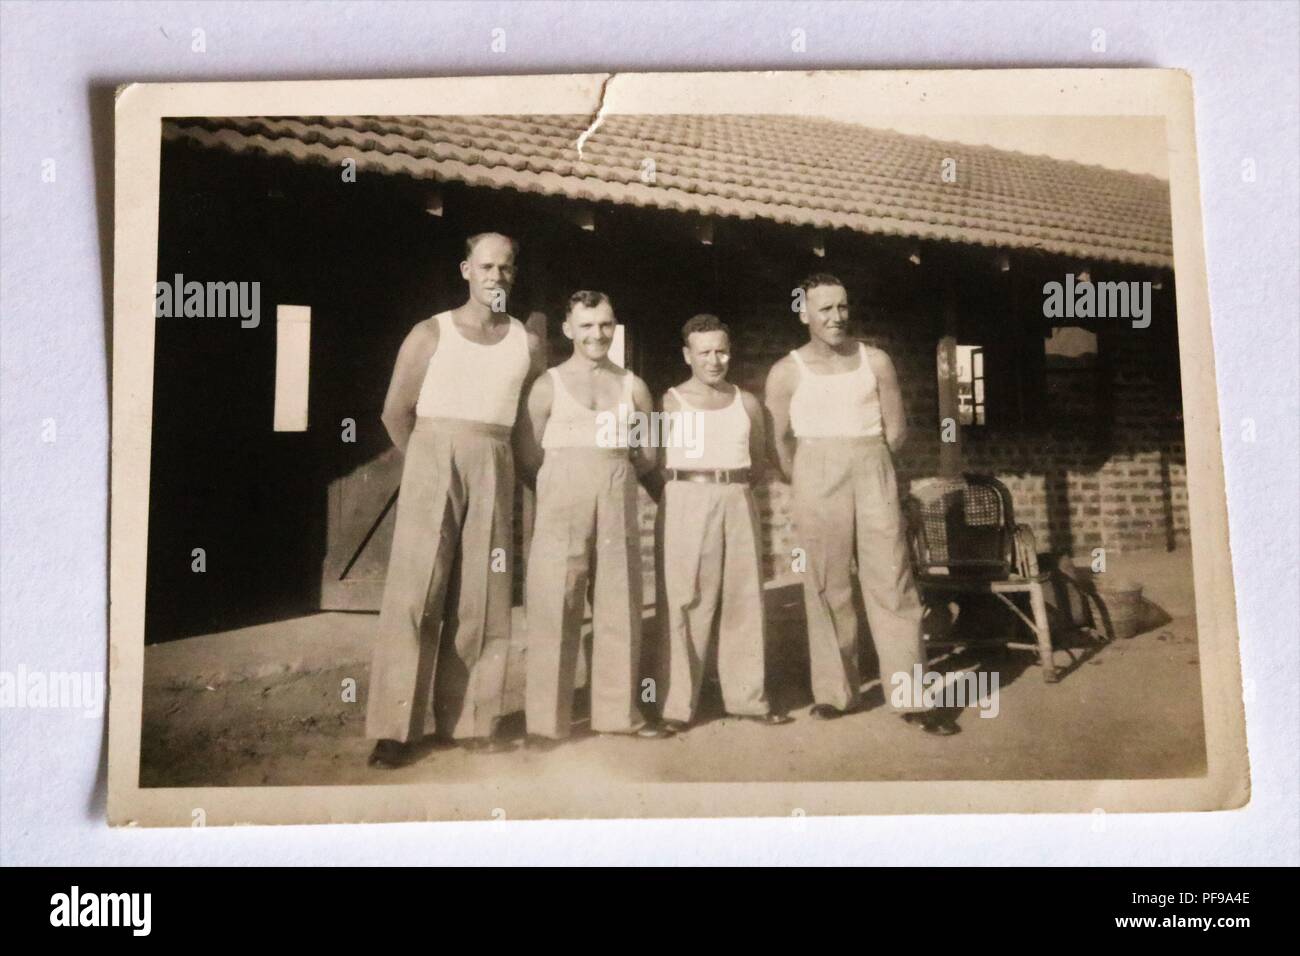 Social History - Black and white old photograph showing 4 men posing for photo, possibly at work, all wearing vests and trousers 1930s Stock Photo